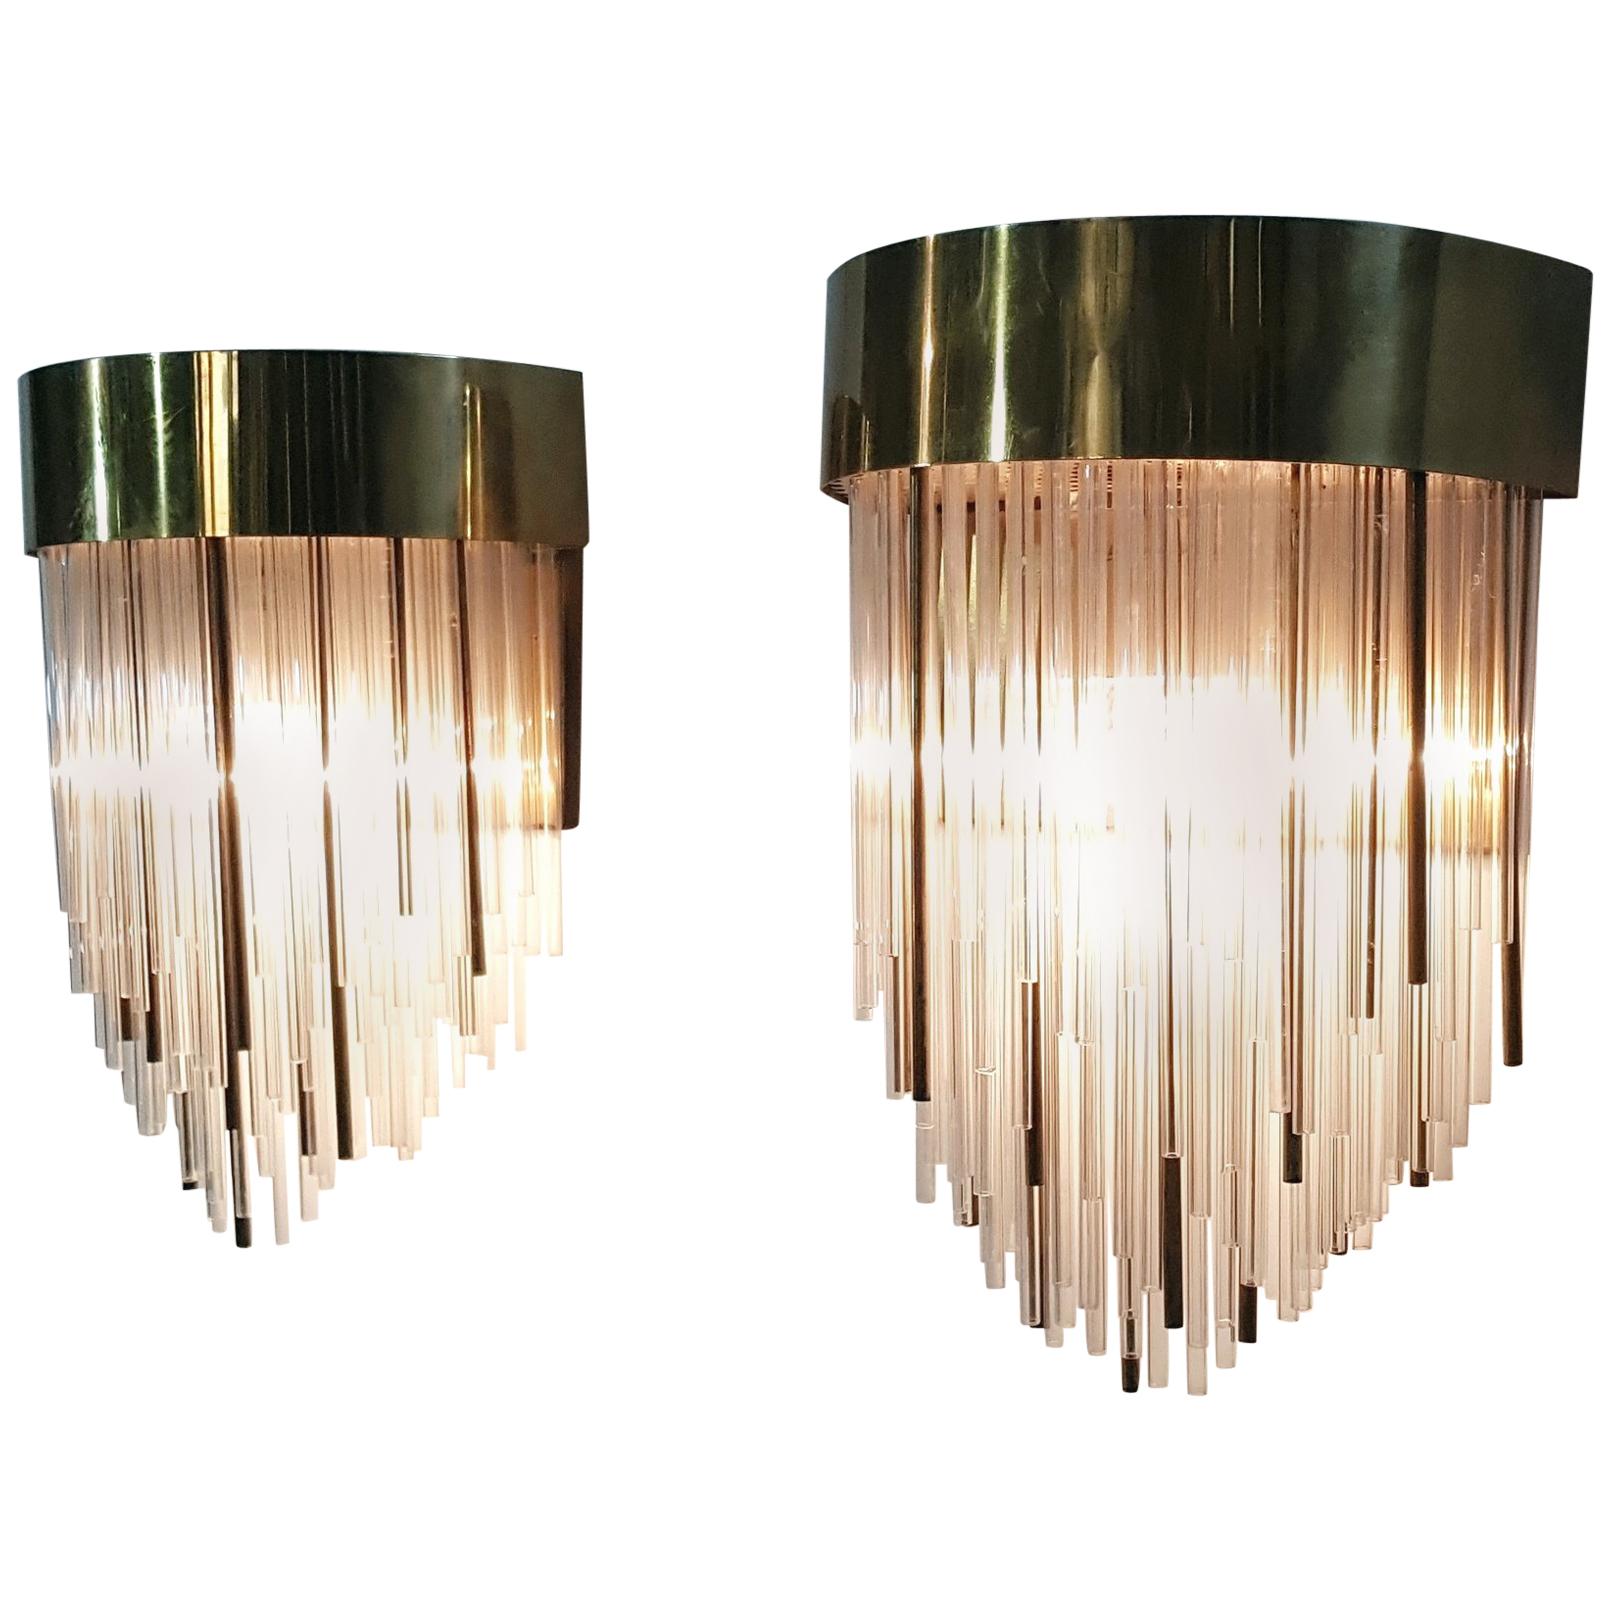 A pair of unusual and beautiful wall sconces with glass and brass 